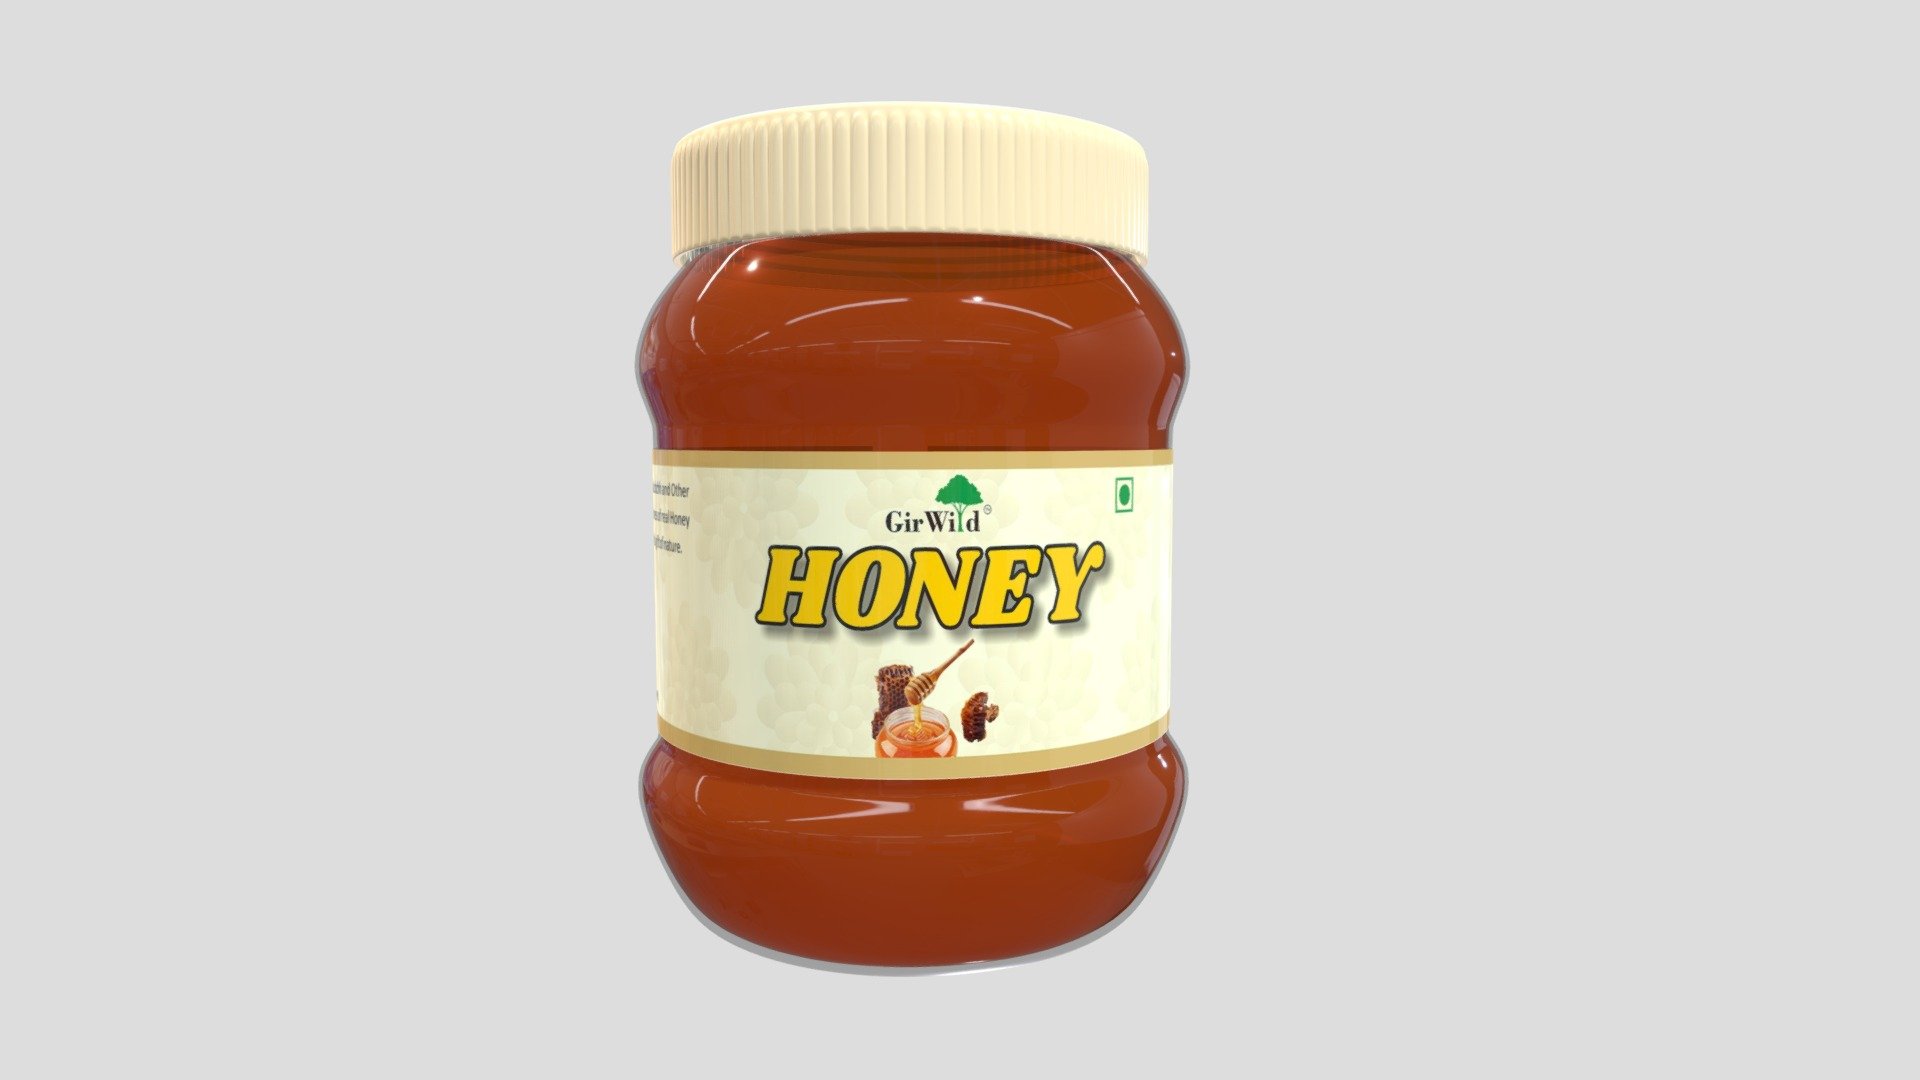 Gir Wild Honey 1KG

Pure and Natural

M.R.P. 349Rs - Gir Wild Honey 1KG - 3D model by girwildhoney 3d model